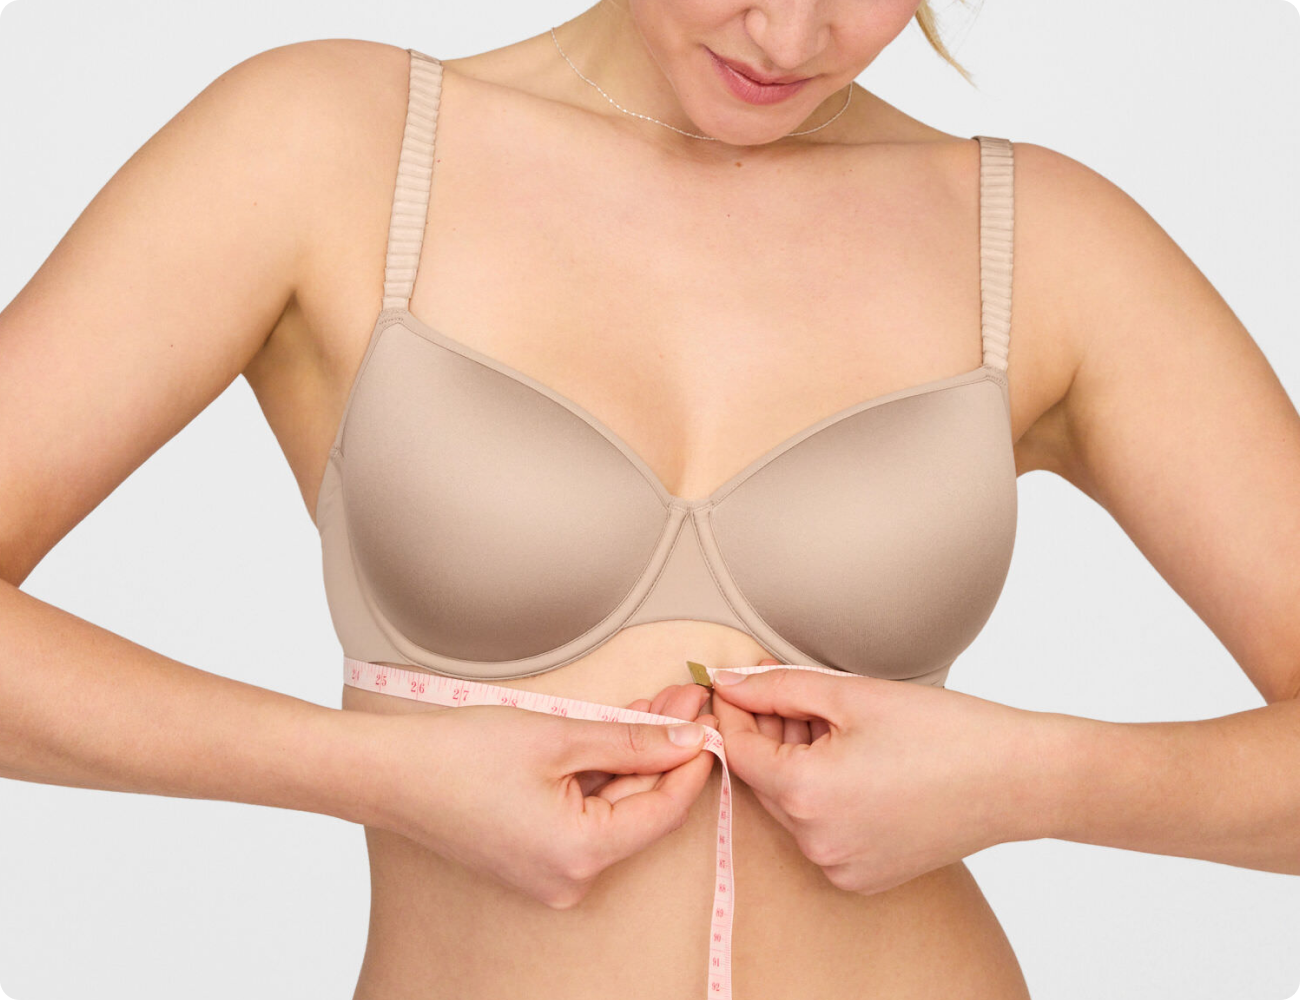 Where did the phrase 80% of women wear the wrong bra size come from? - Quora